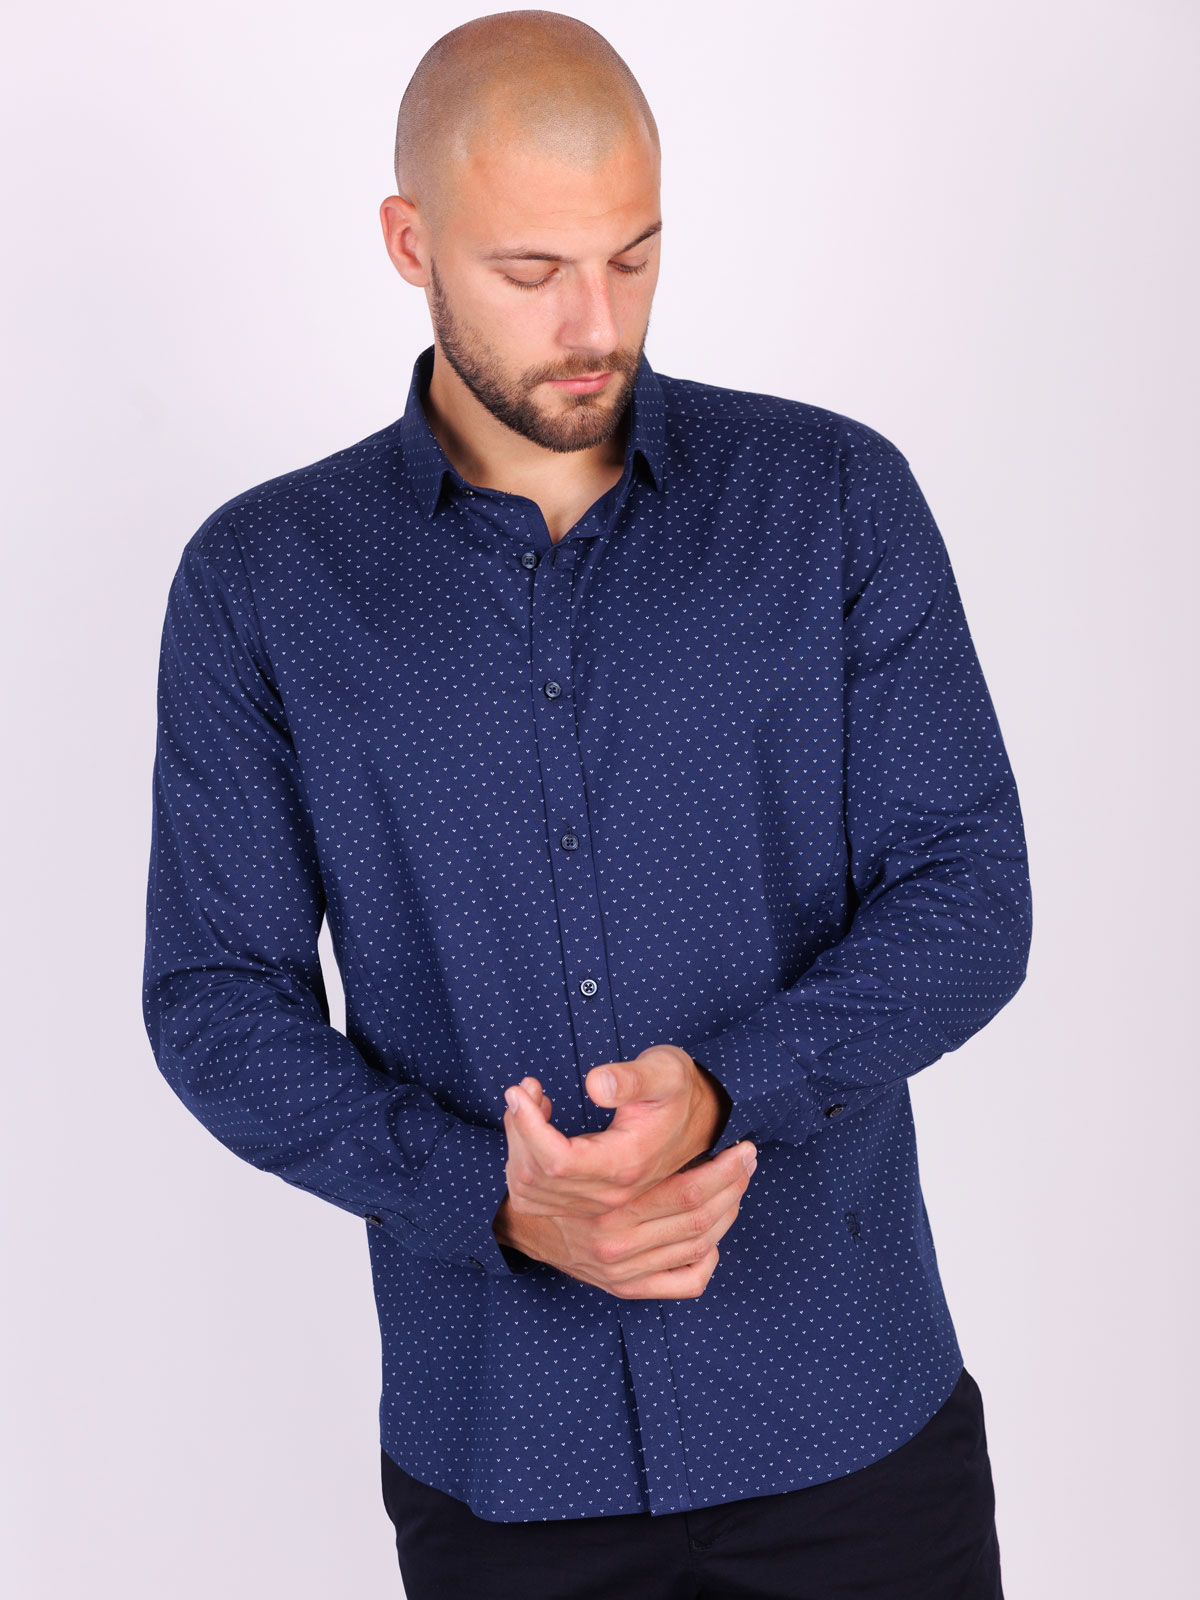 Mens shirt with white figures - 21572 € 44.43 img4